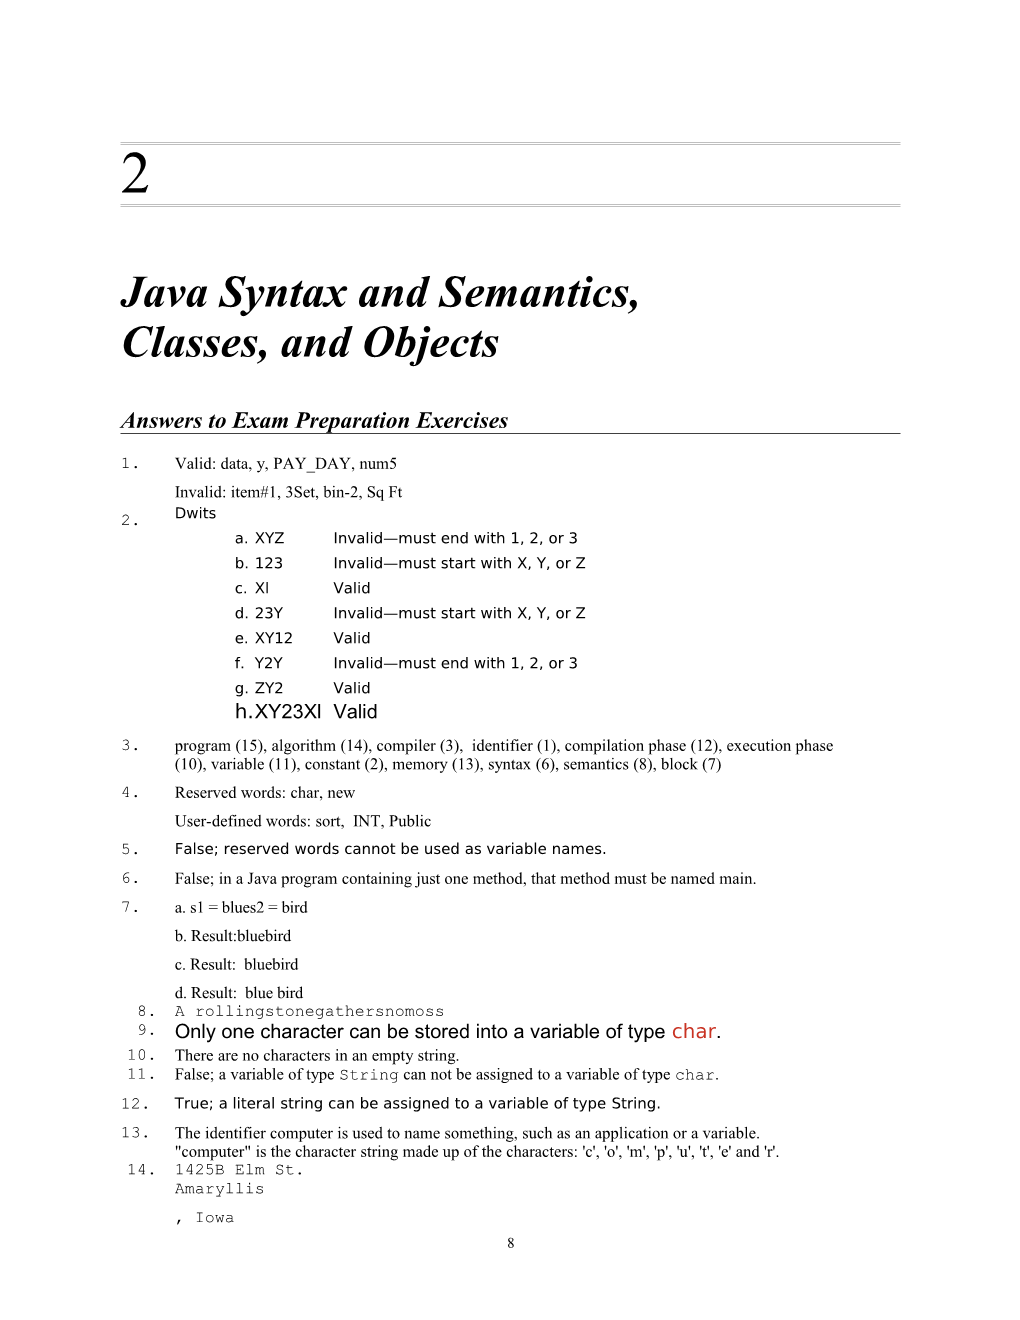 Java Syntax and Semantics, Classes, and Objects